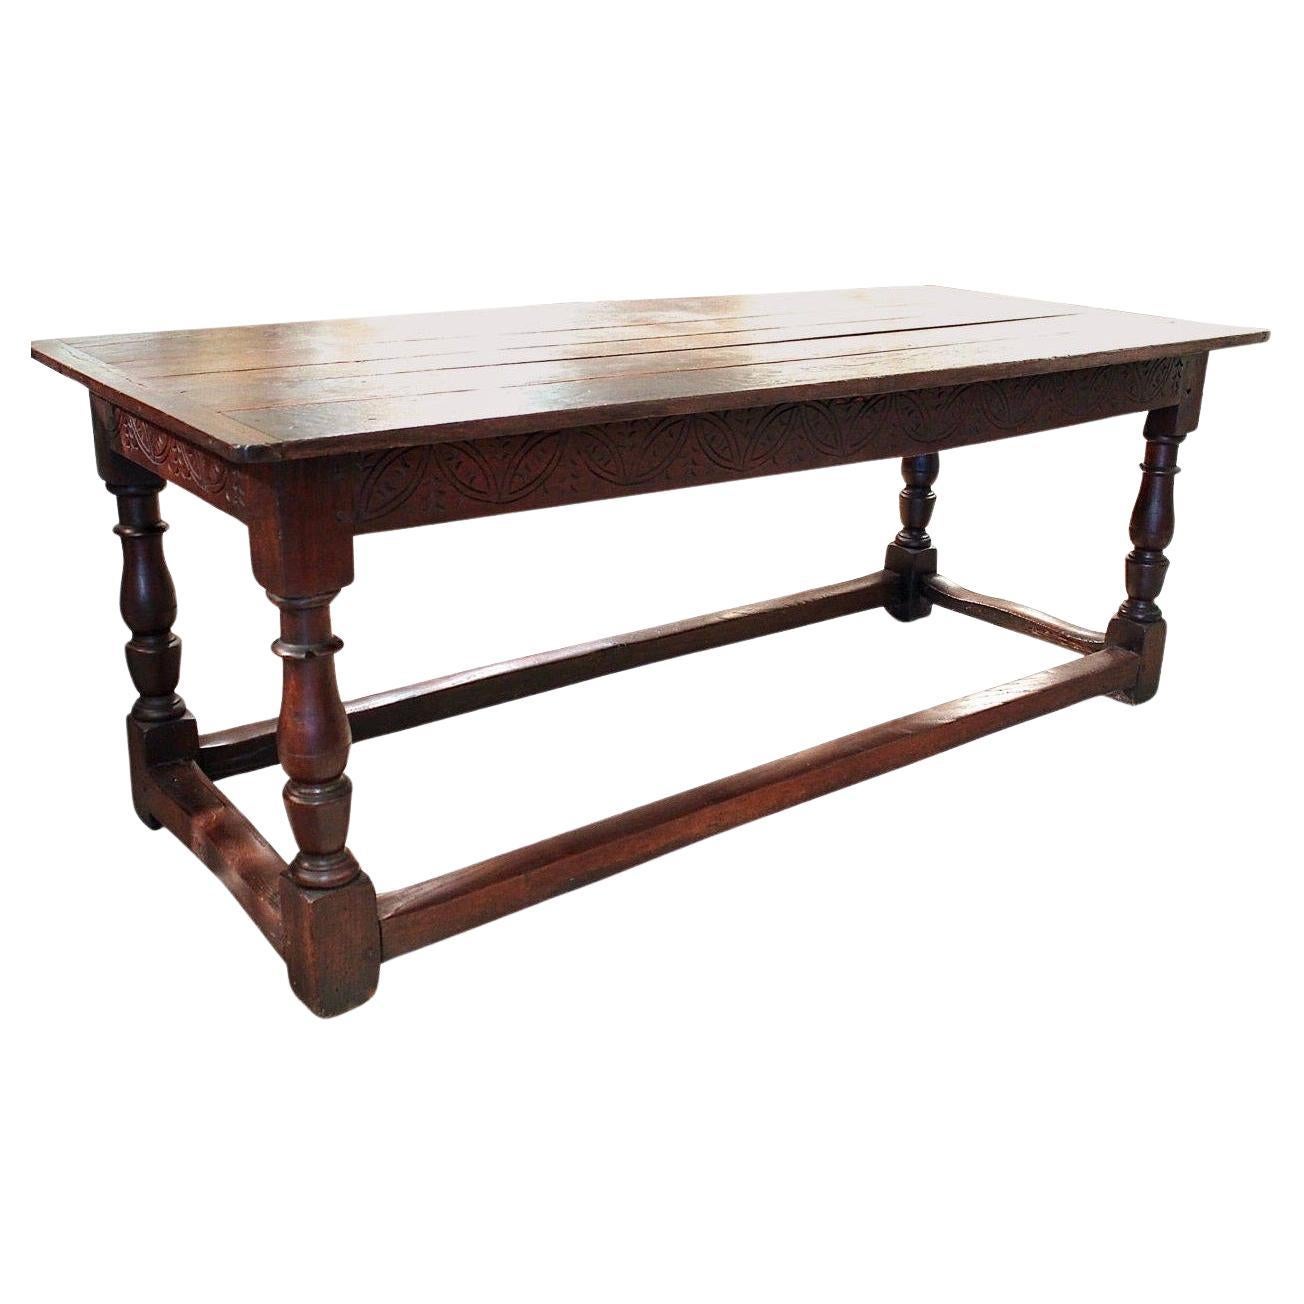 English Oak Refectory Table, Late 17th Century